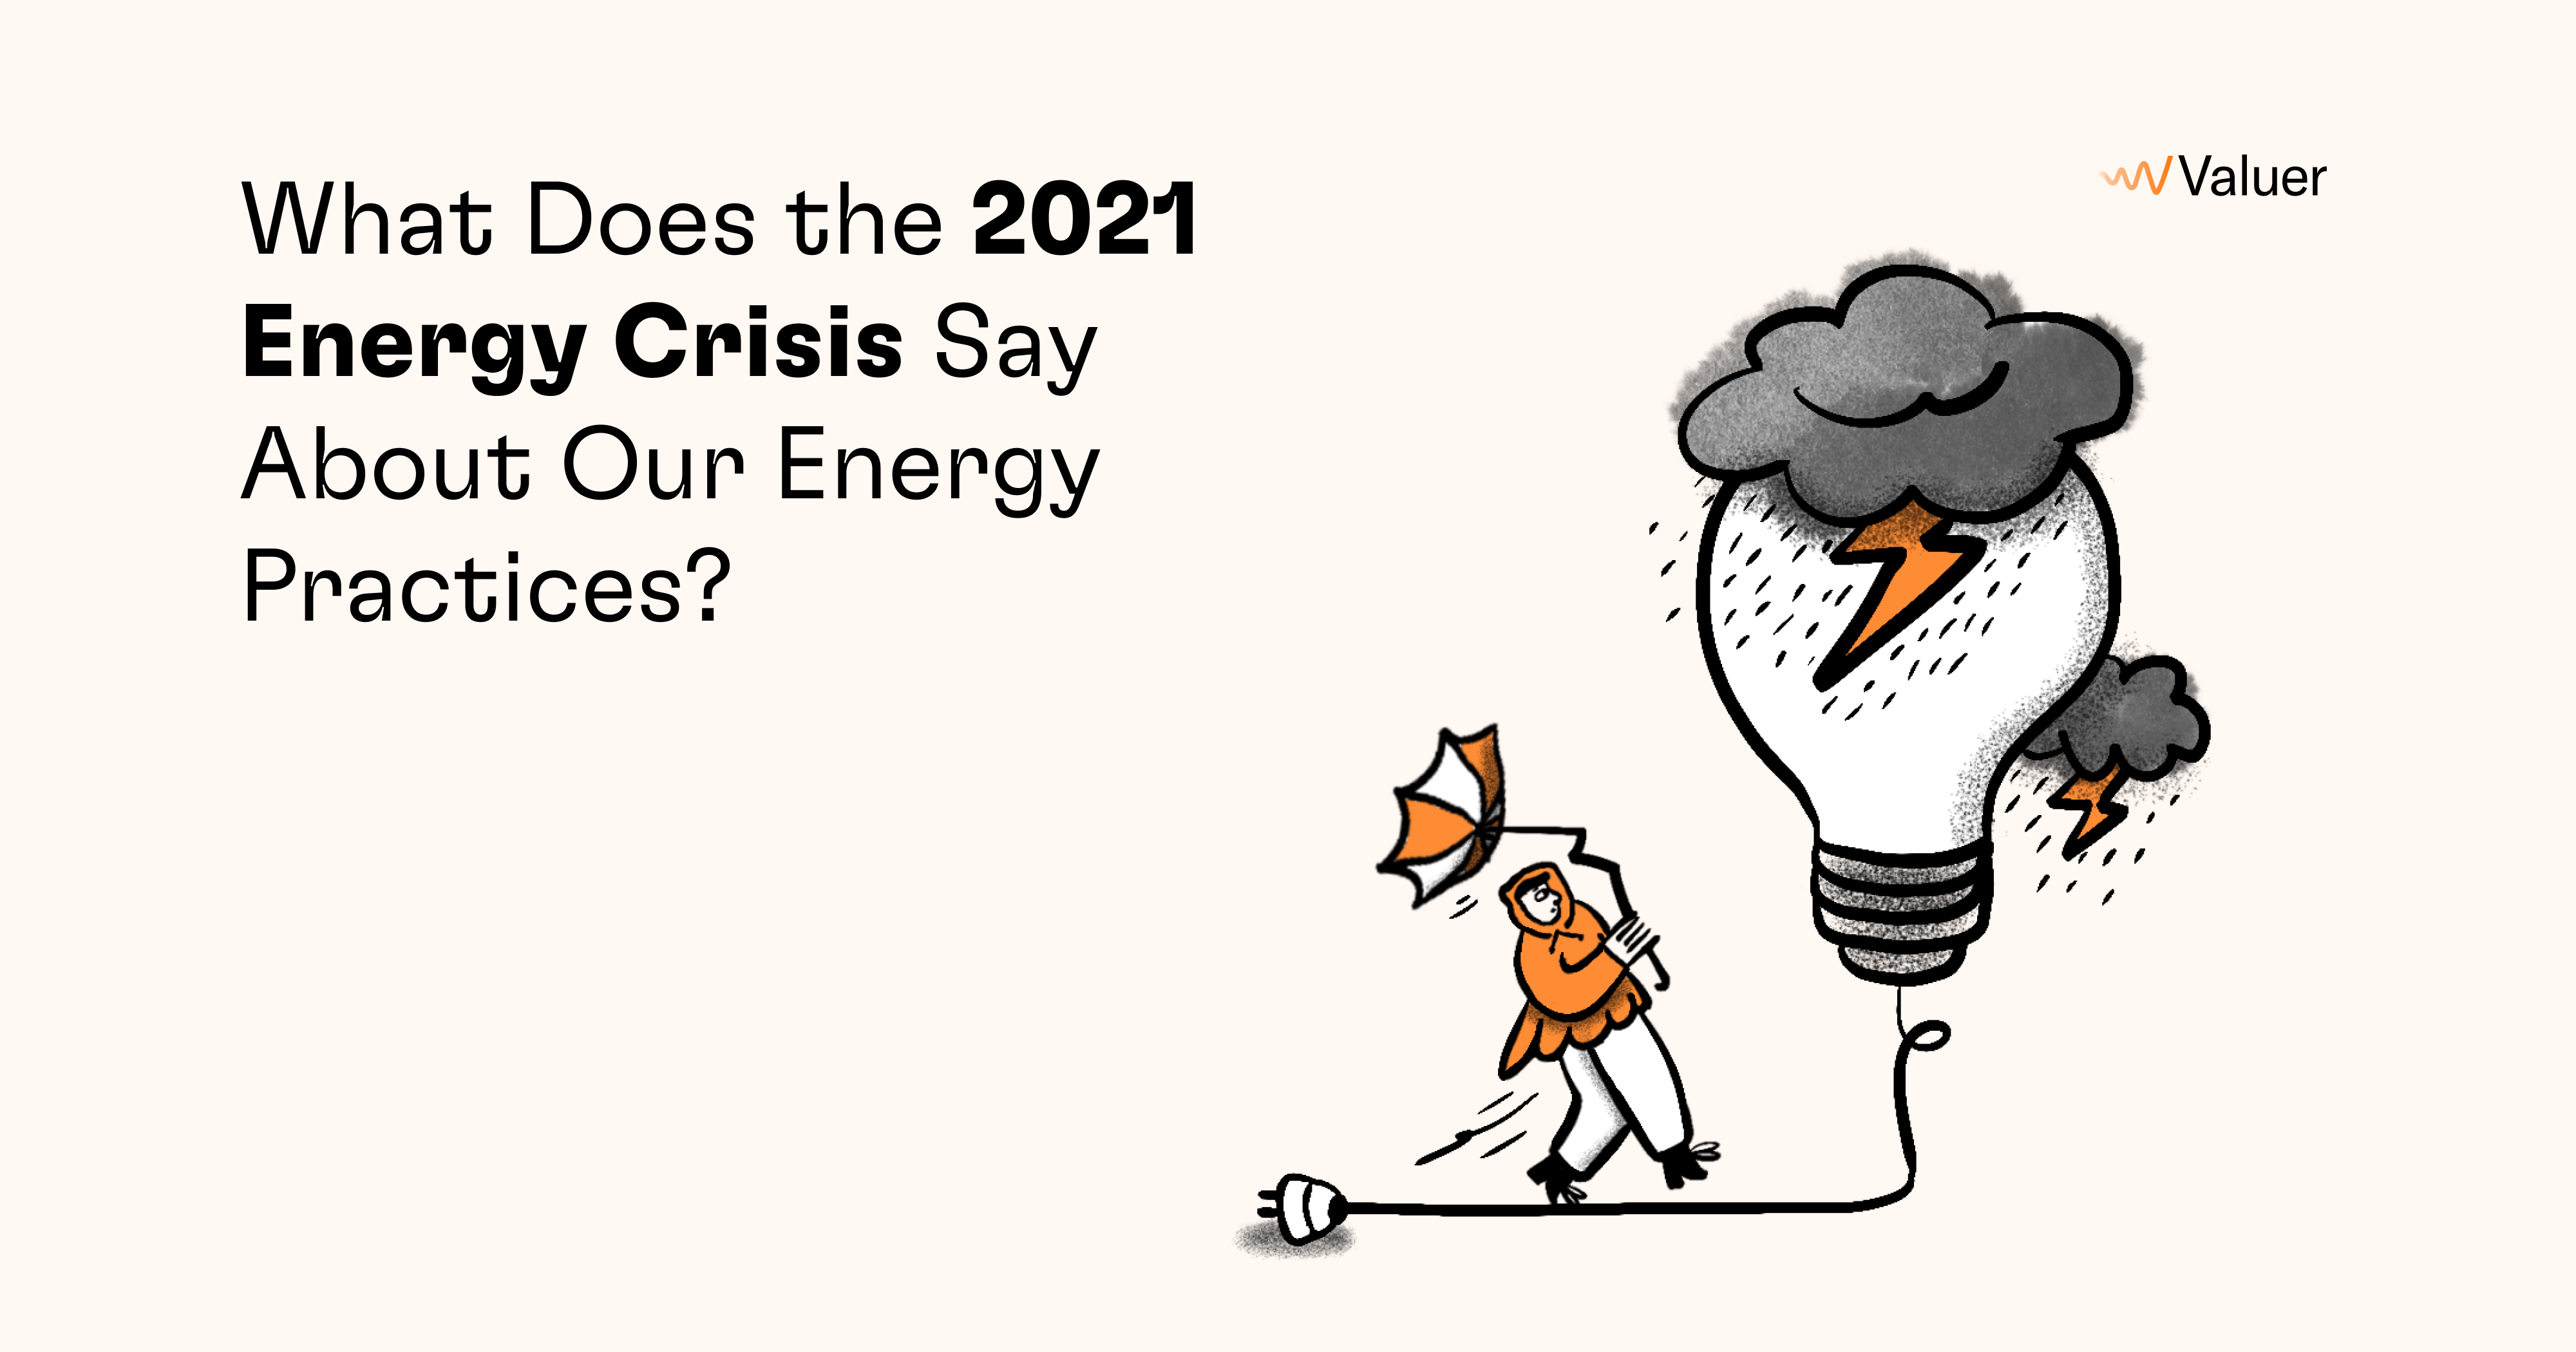 What Does the 2021 Energy Crisis Say About Our Energy Practices?